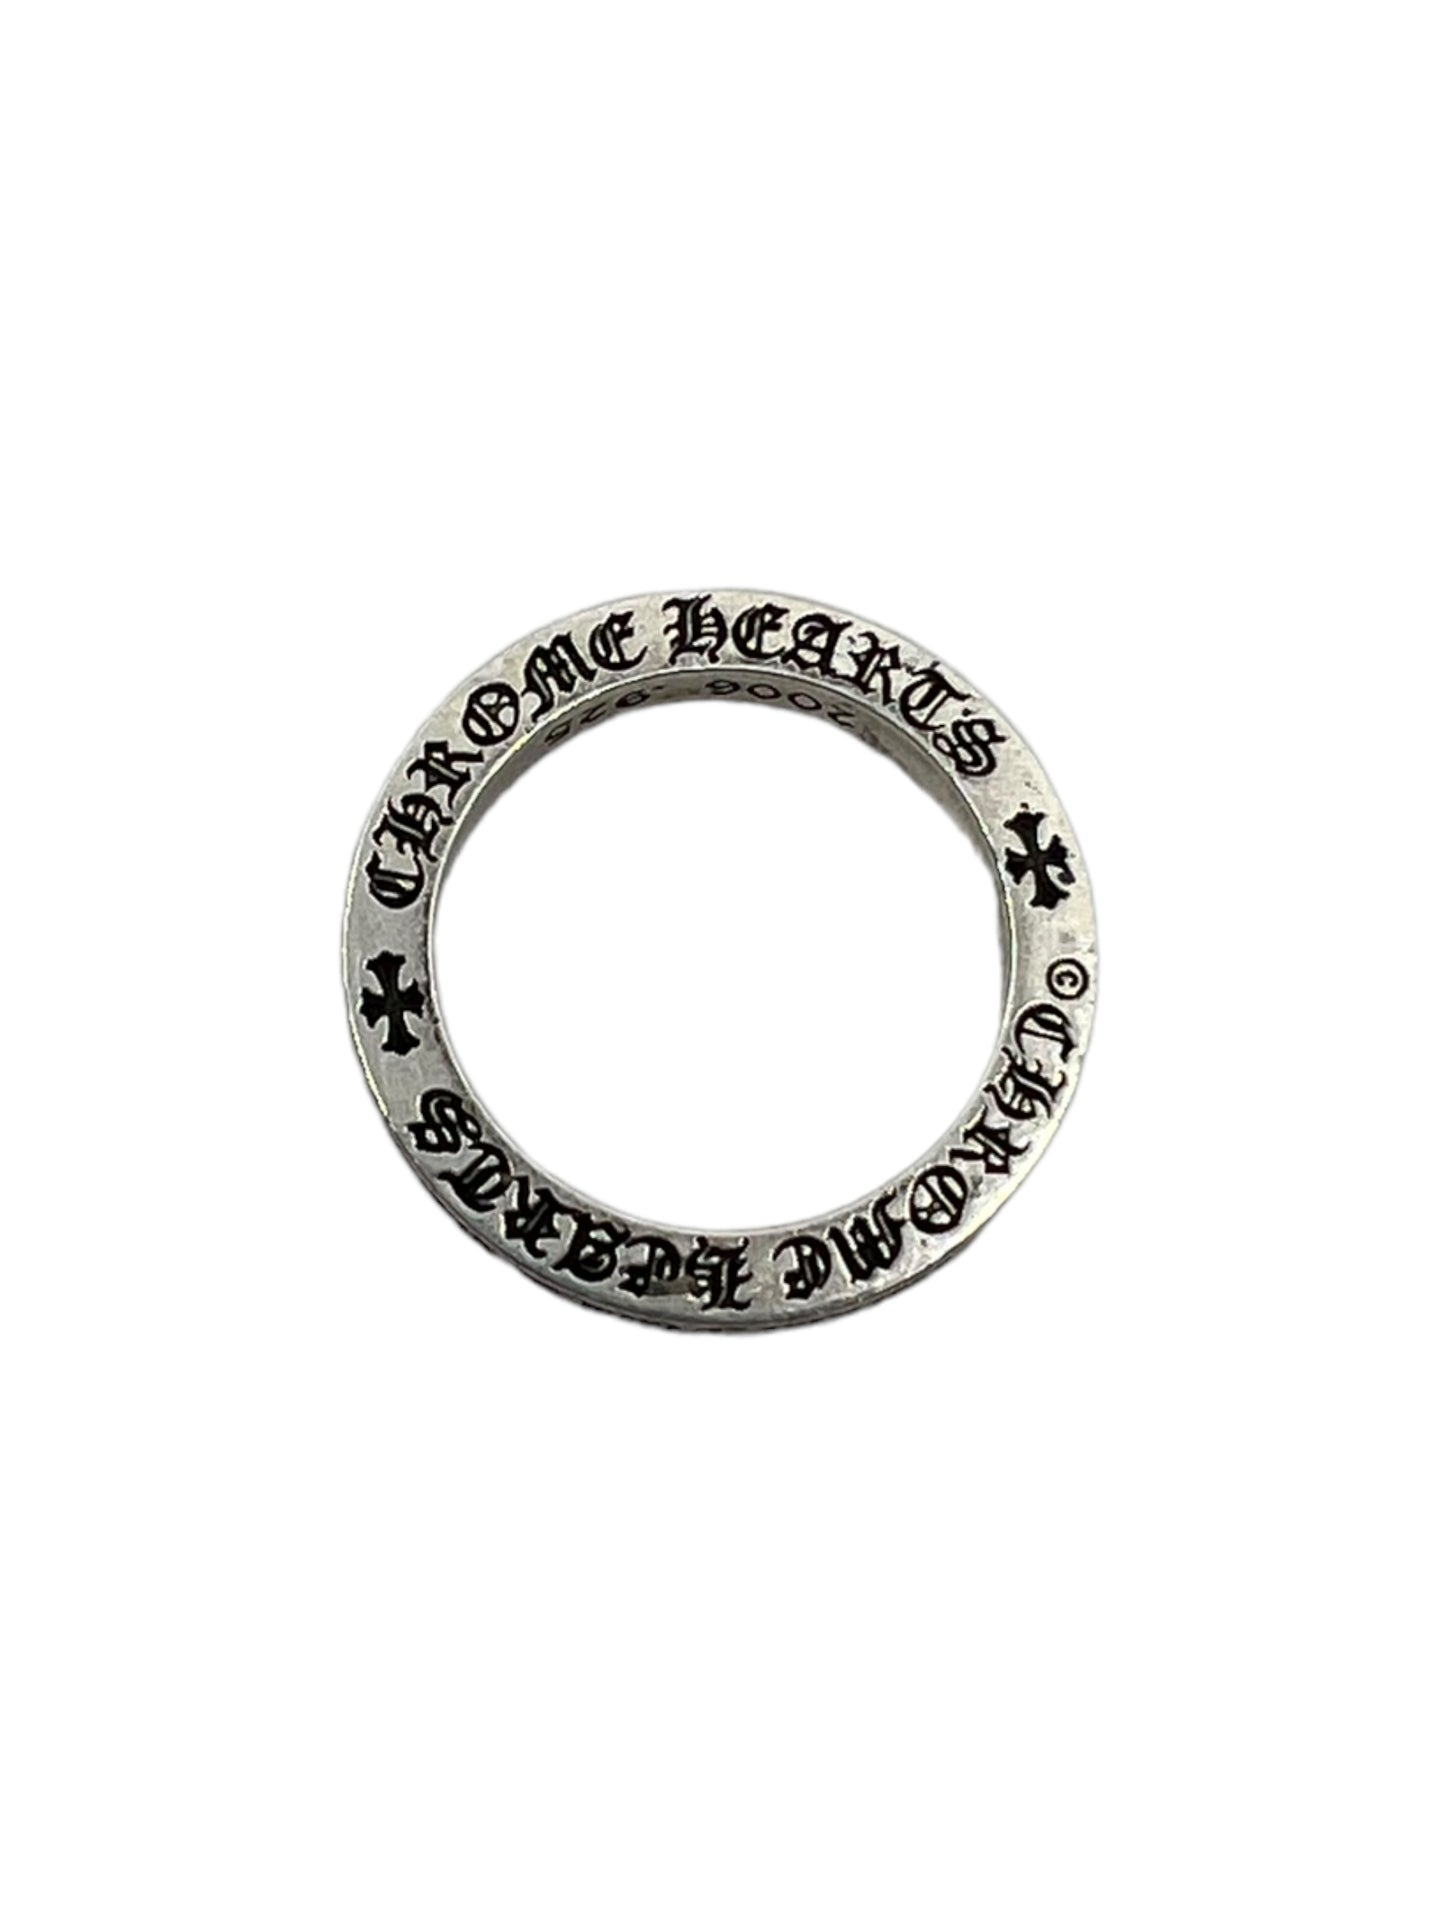 Chrome Hearts Honolulu Ring size 7 1/2 pre-owned